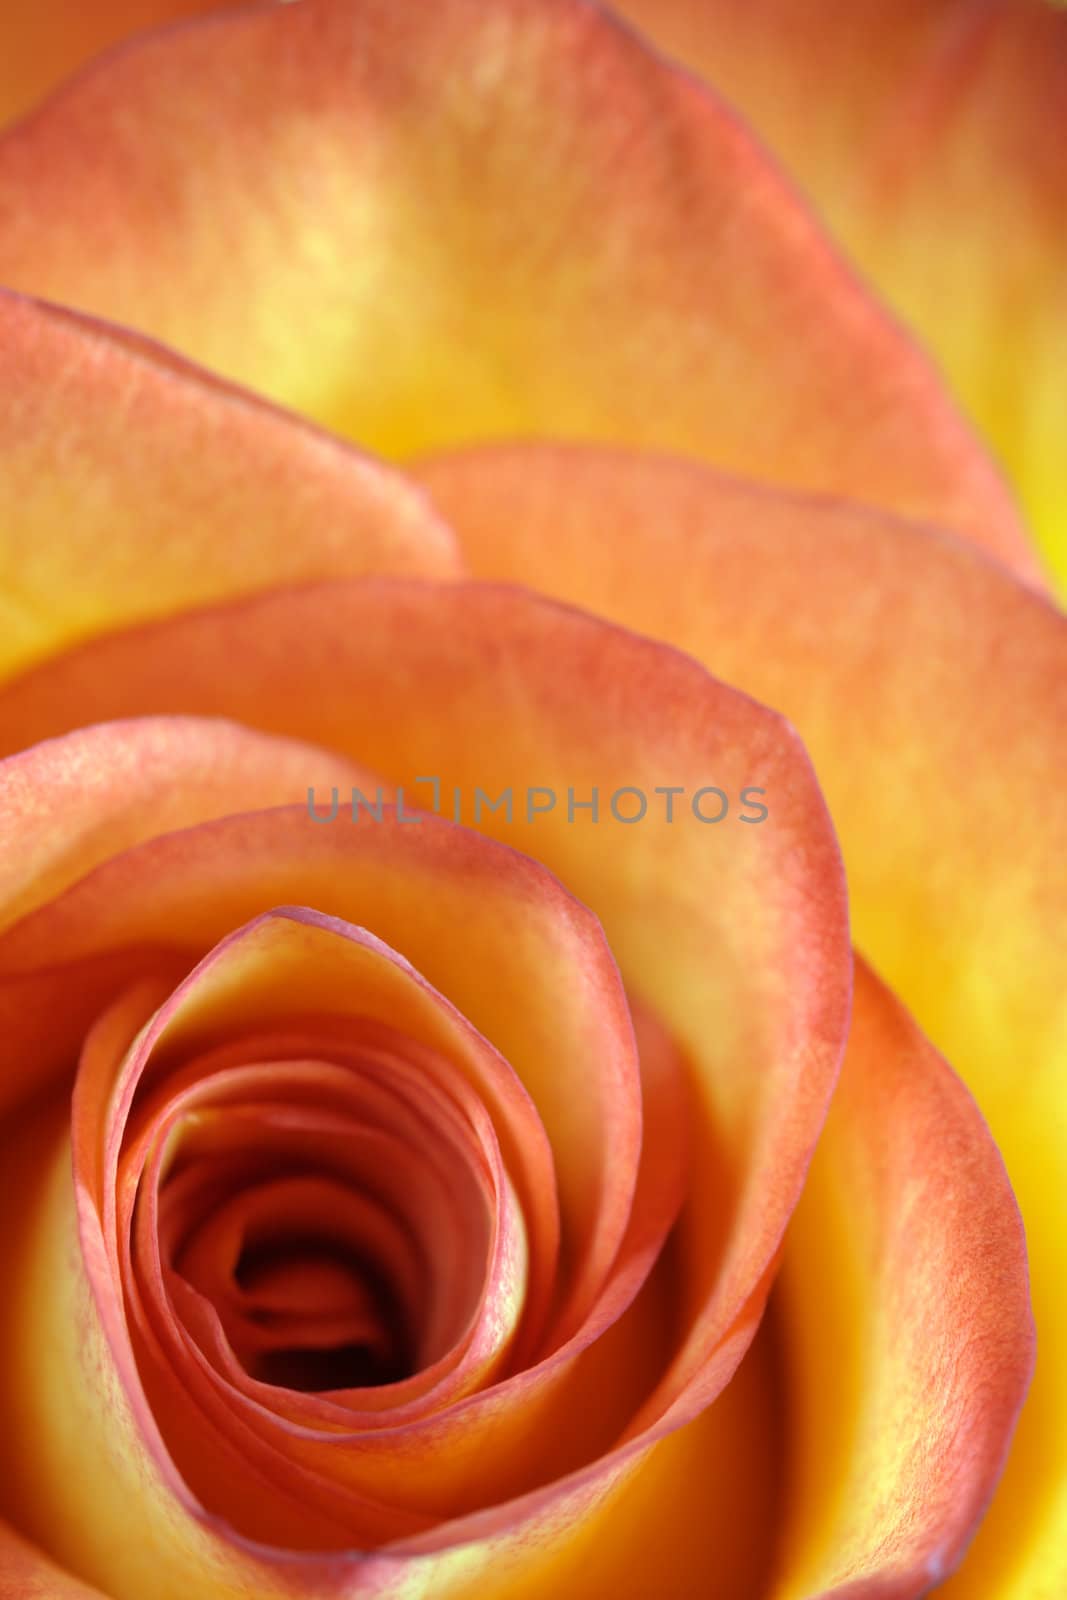 Shallow depth-of-field image of the centre of a orange and yellow rose.